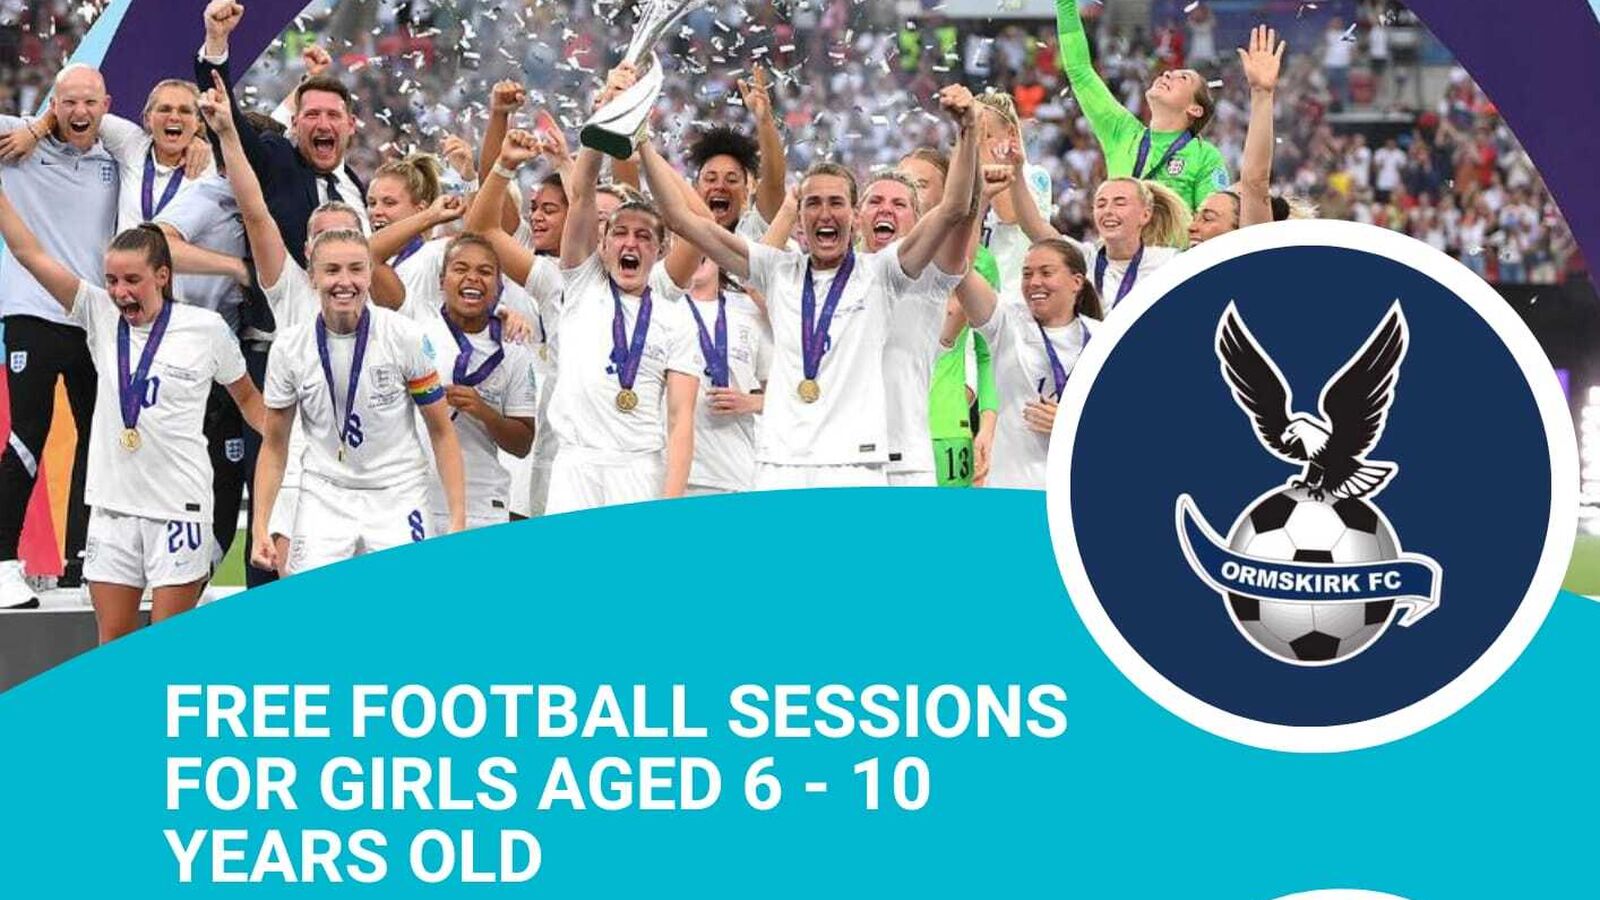 Free Football Sessions for Girls Aged 6-10 years old